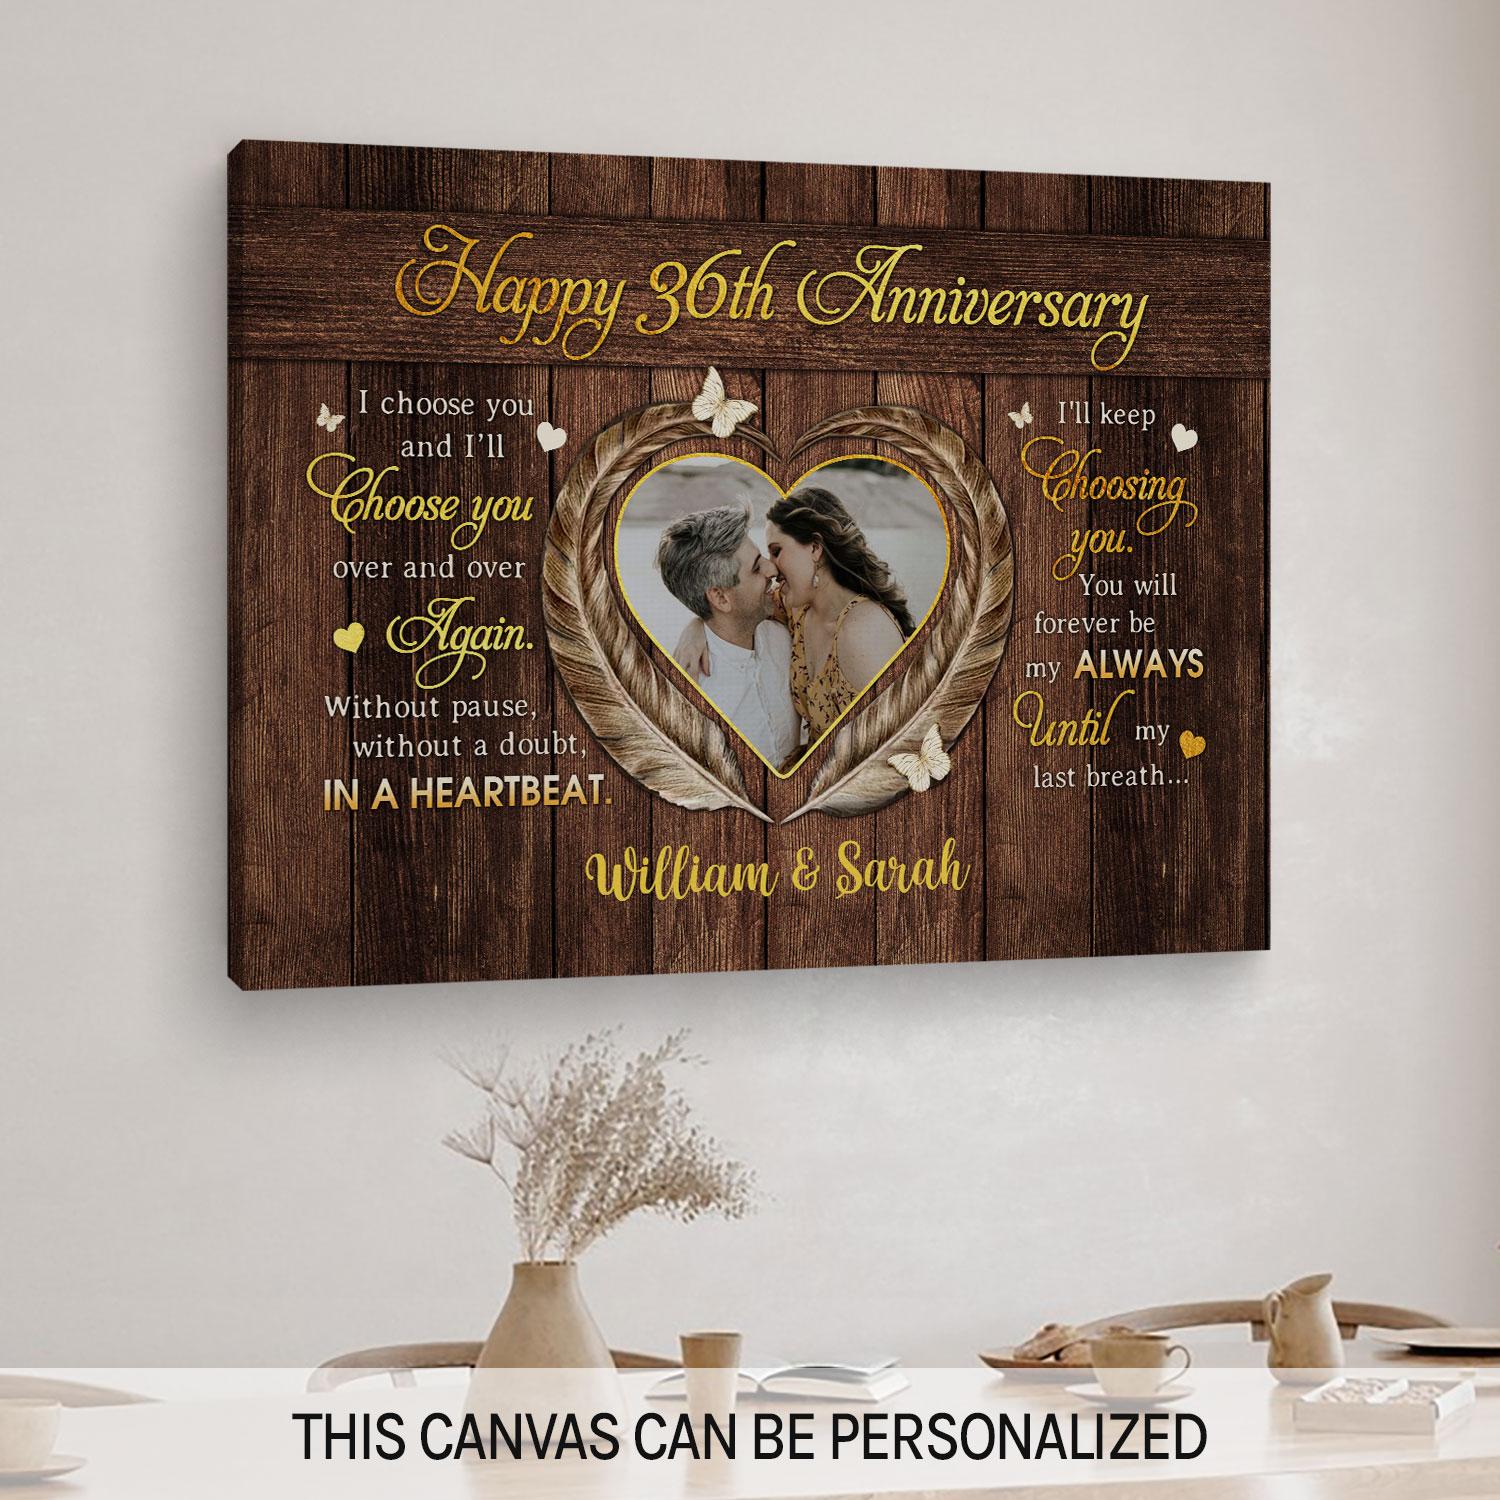 Happy 36th Anniversary - Personalized 36 Year Anniversary gift For Husband or Wife - Custom Canvas Print - MyMindfulGifts